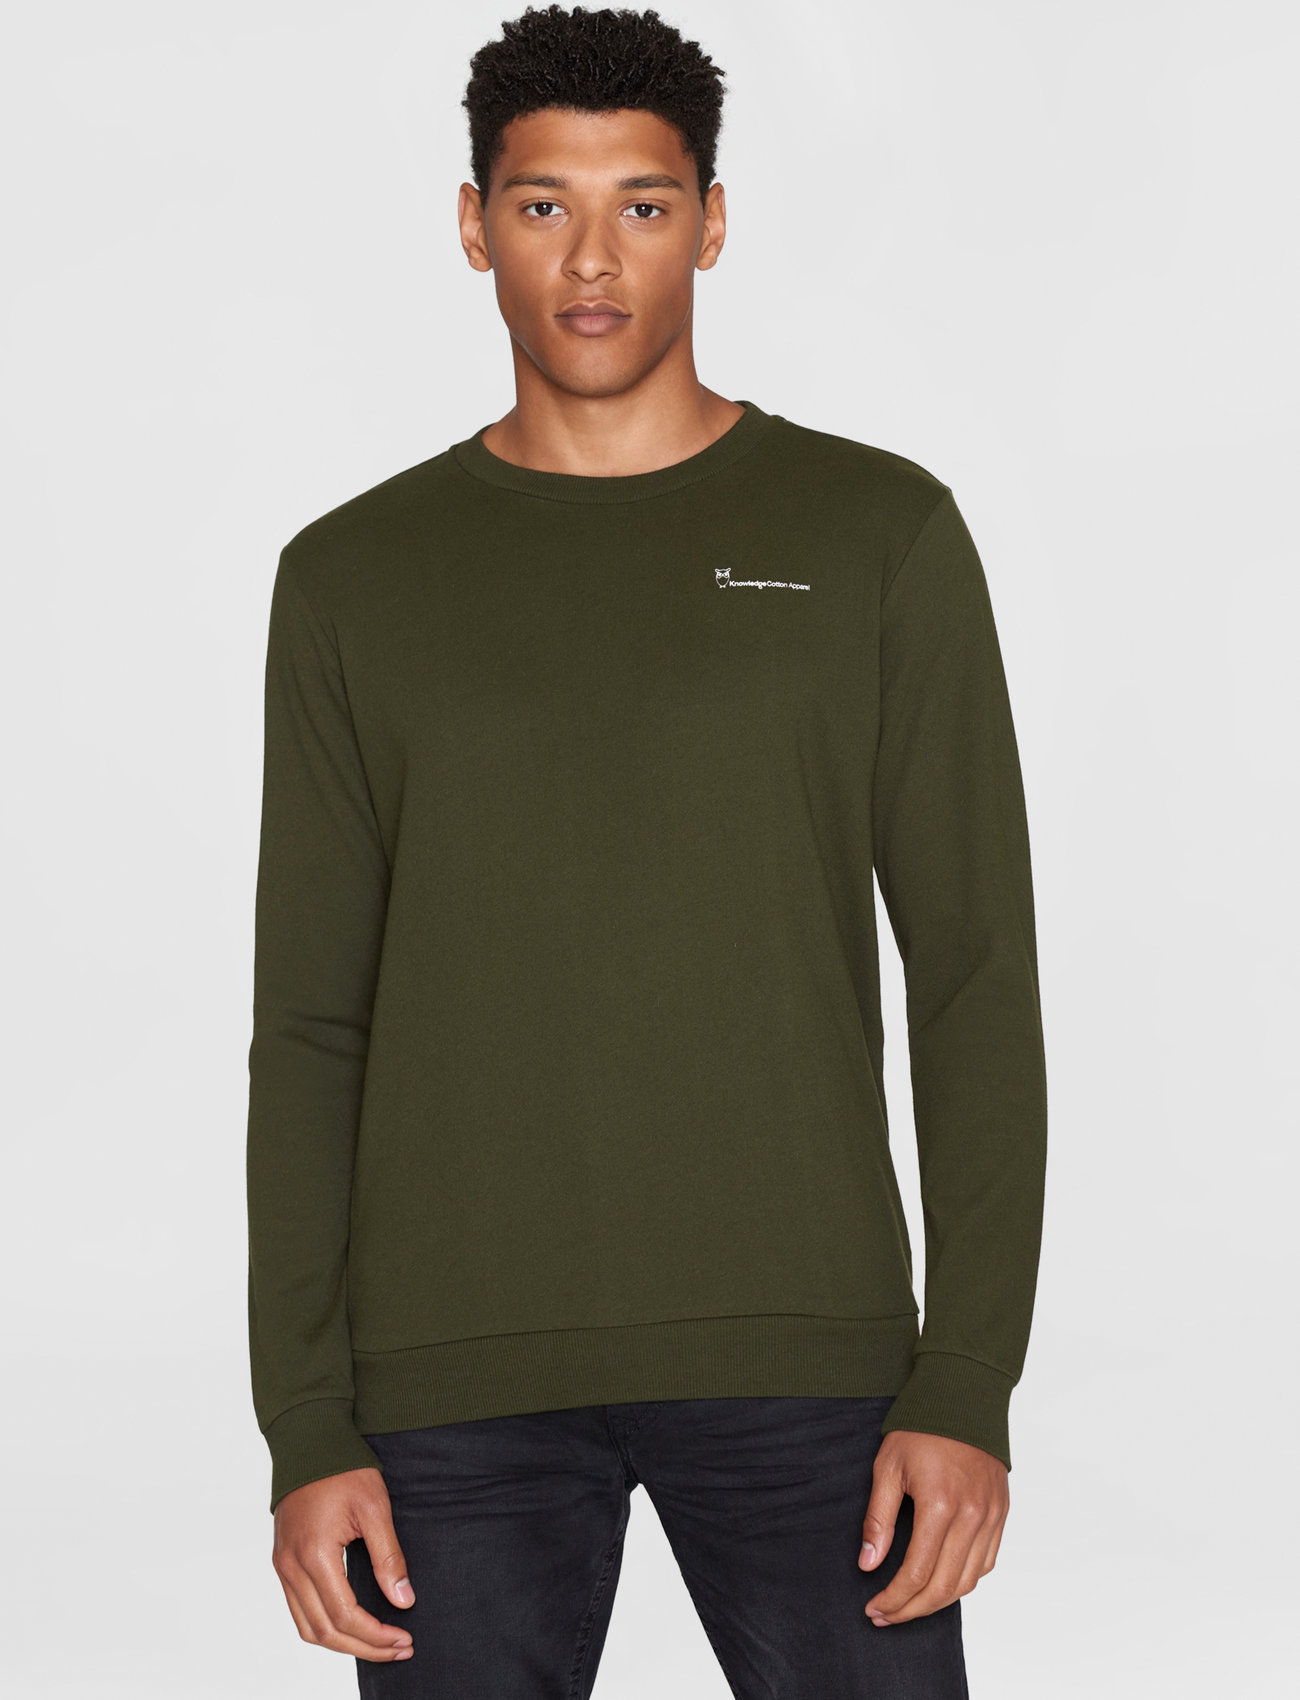 Knowledge Cotton Apparel - Basic knowledgecotton sweat - GOTS/ - clothing - forrest night - 0